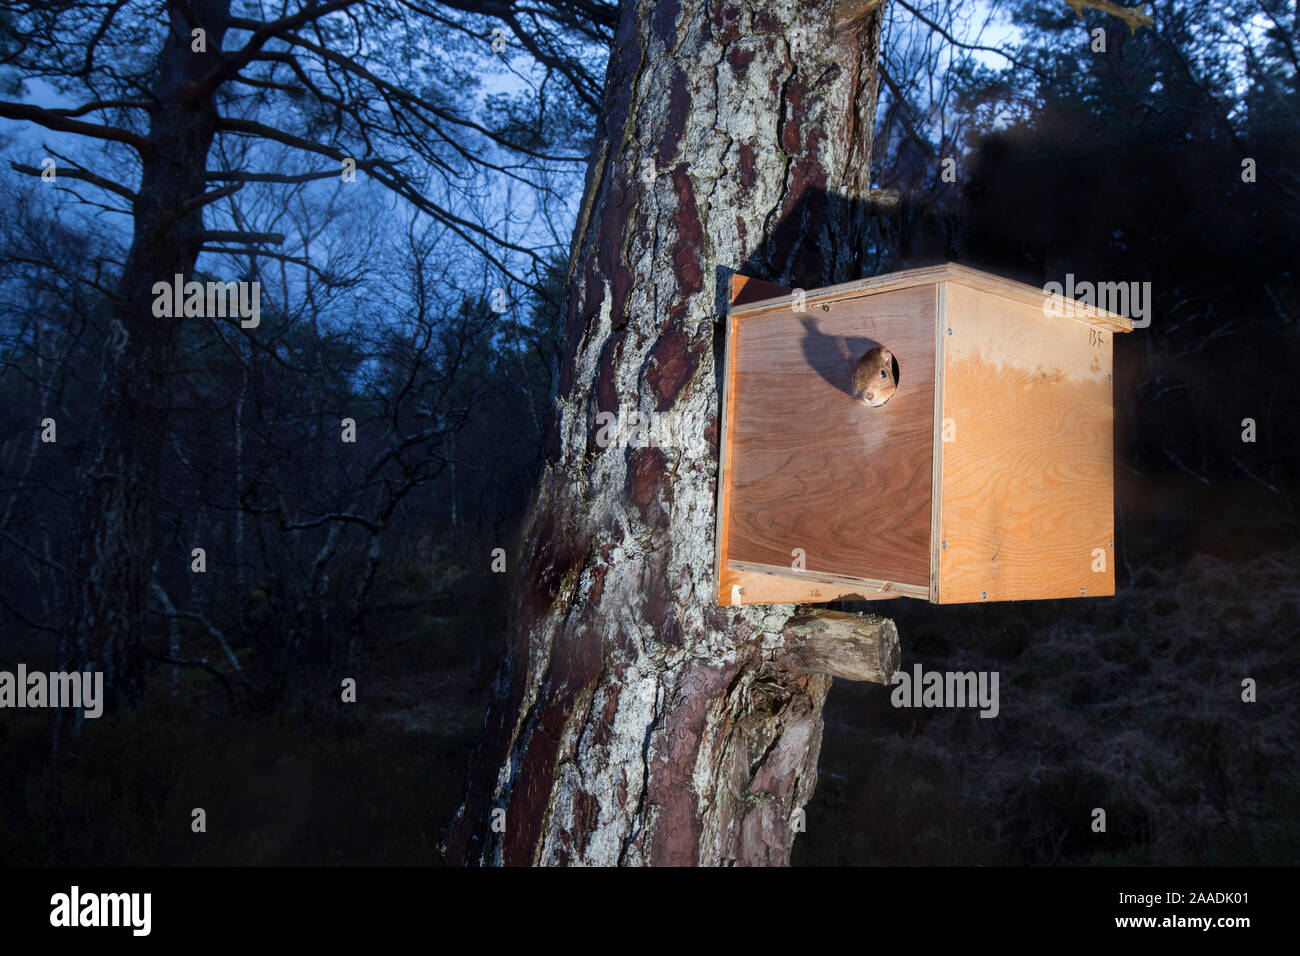 Remote camera shot of Red squirrel (Sciurus vulgaris) emerging from transit box following its translocation from Moray to Plockton, Scotland, UK. Winner of the Documentary Series Category of the British Wildlife Photography Awards (BWPA) 2017. Stock Photo